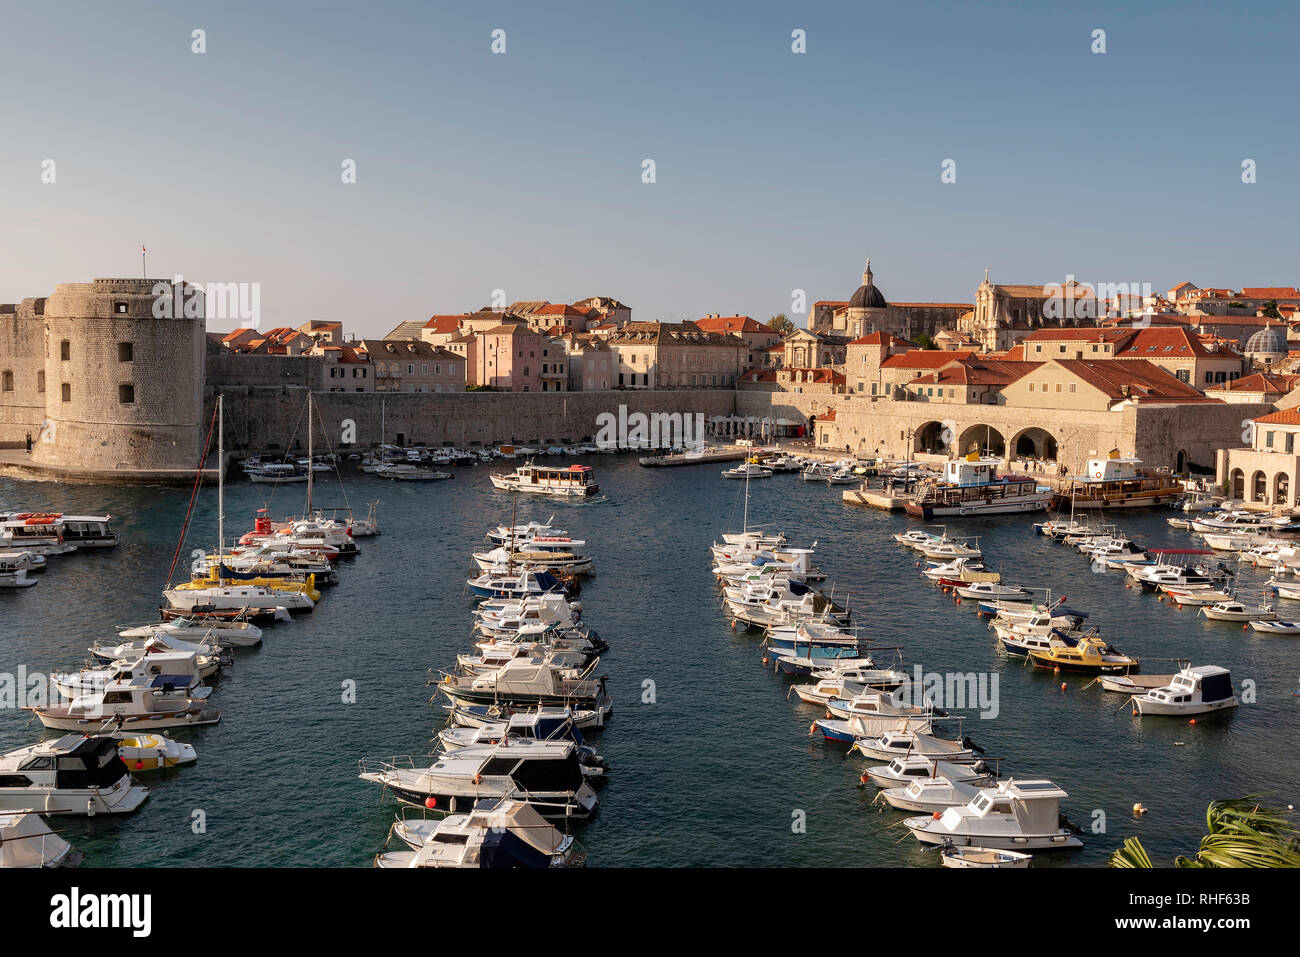 A view of the port in Dubrovnik's old city Stock Photo